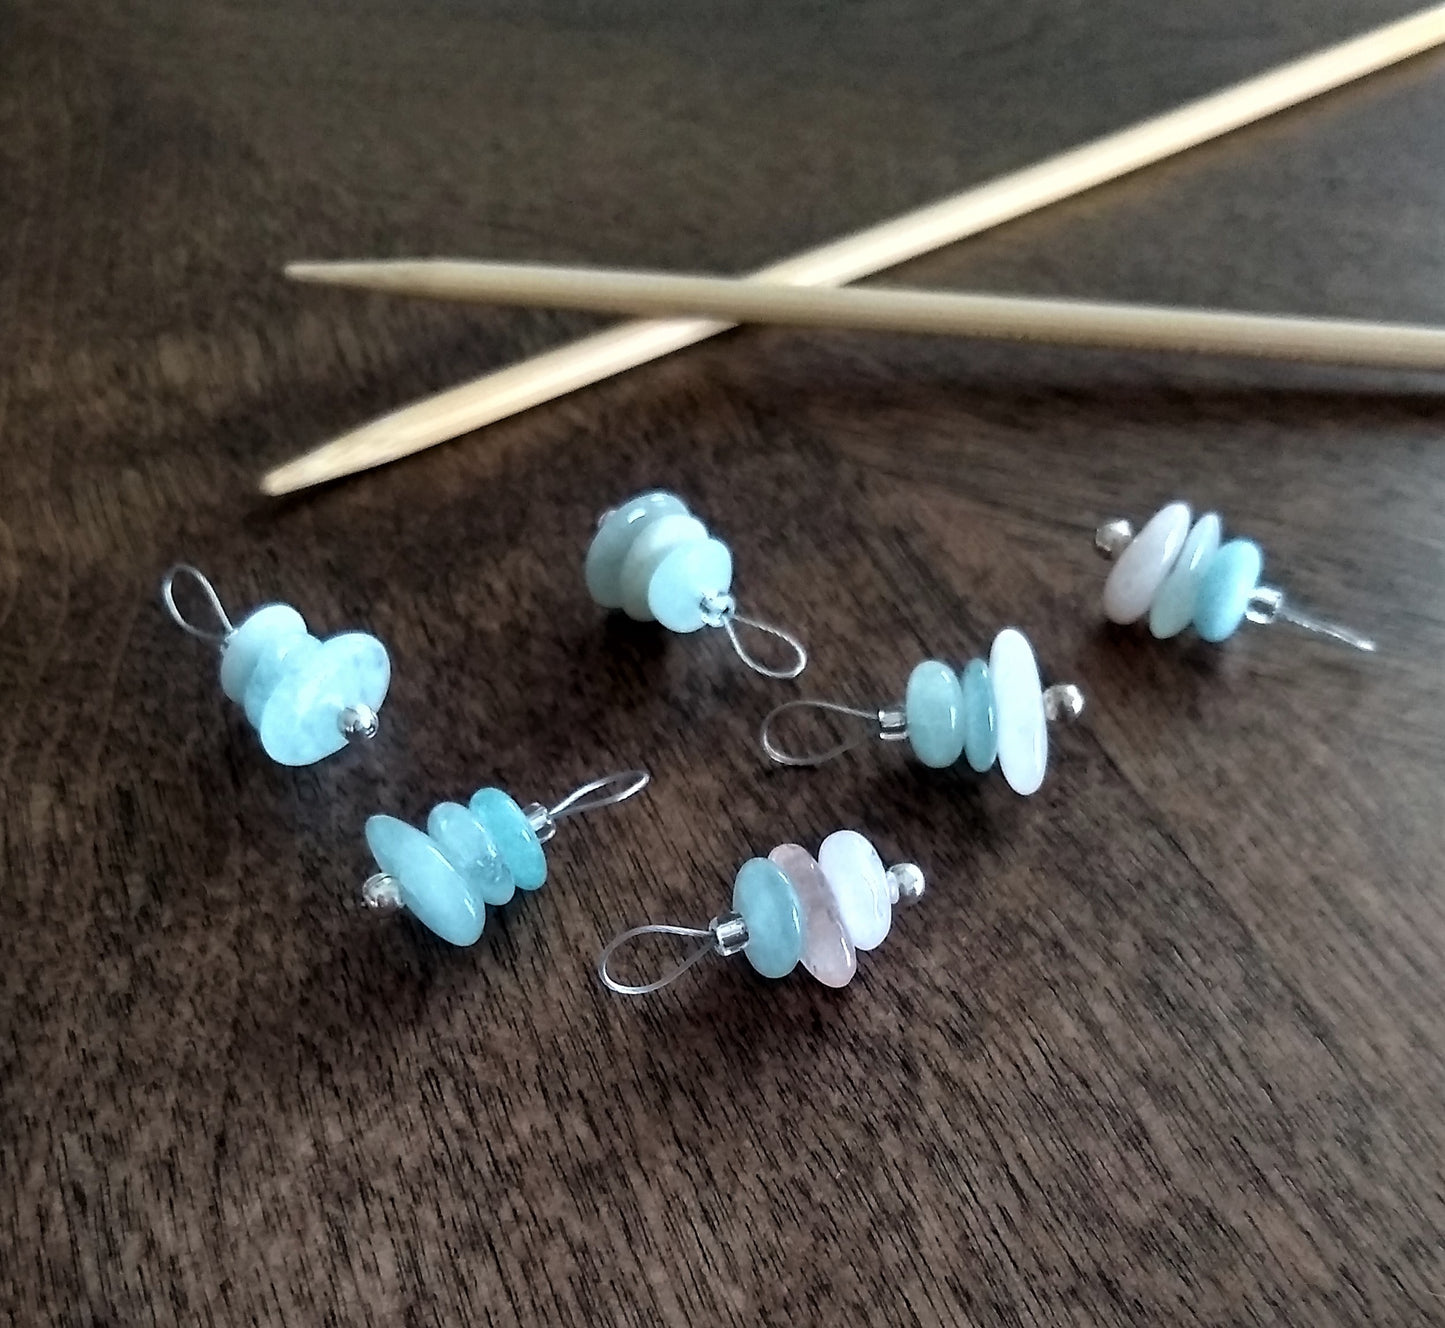 Beryl Gemstone Stitch Markers - stacked stones - limited quantity!